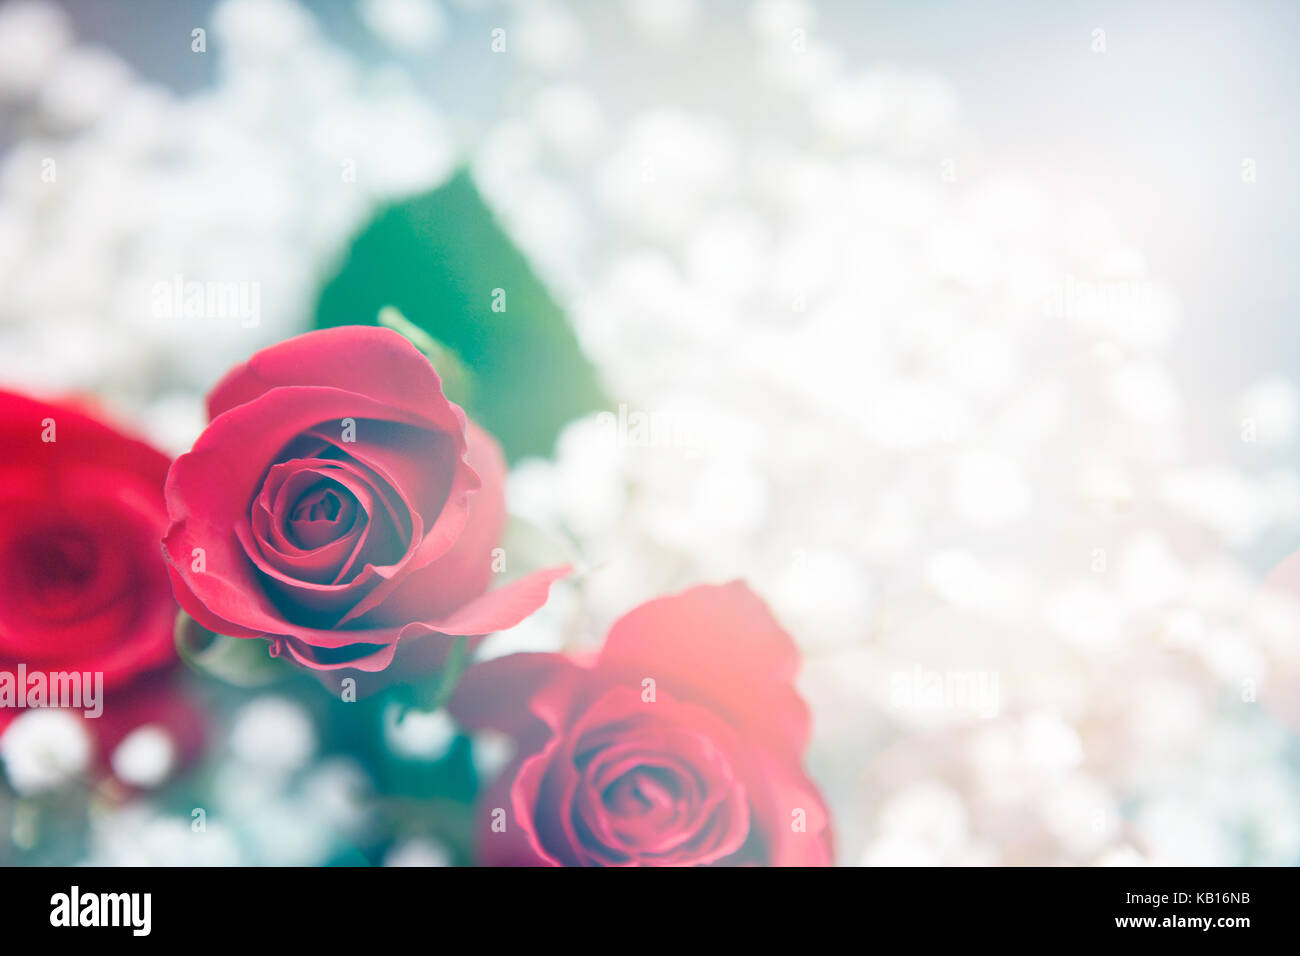 Series of images with roses, candy, champagne, that evoke the holiday. Stock Photo